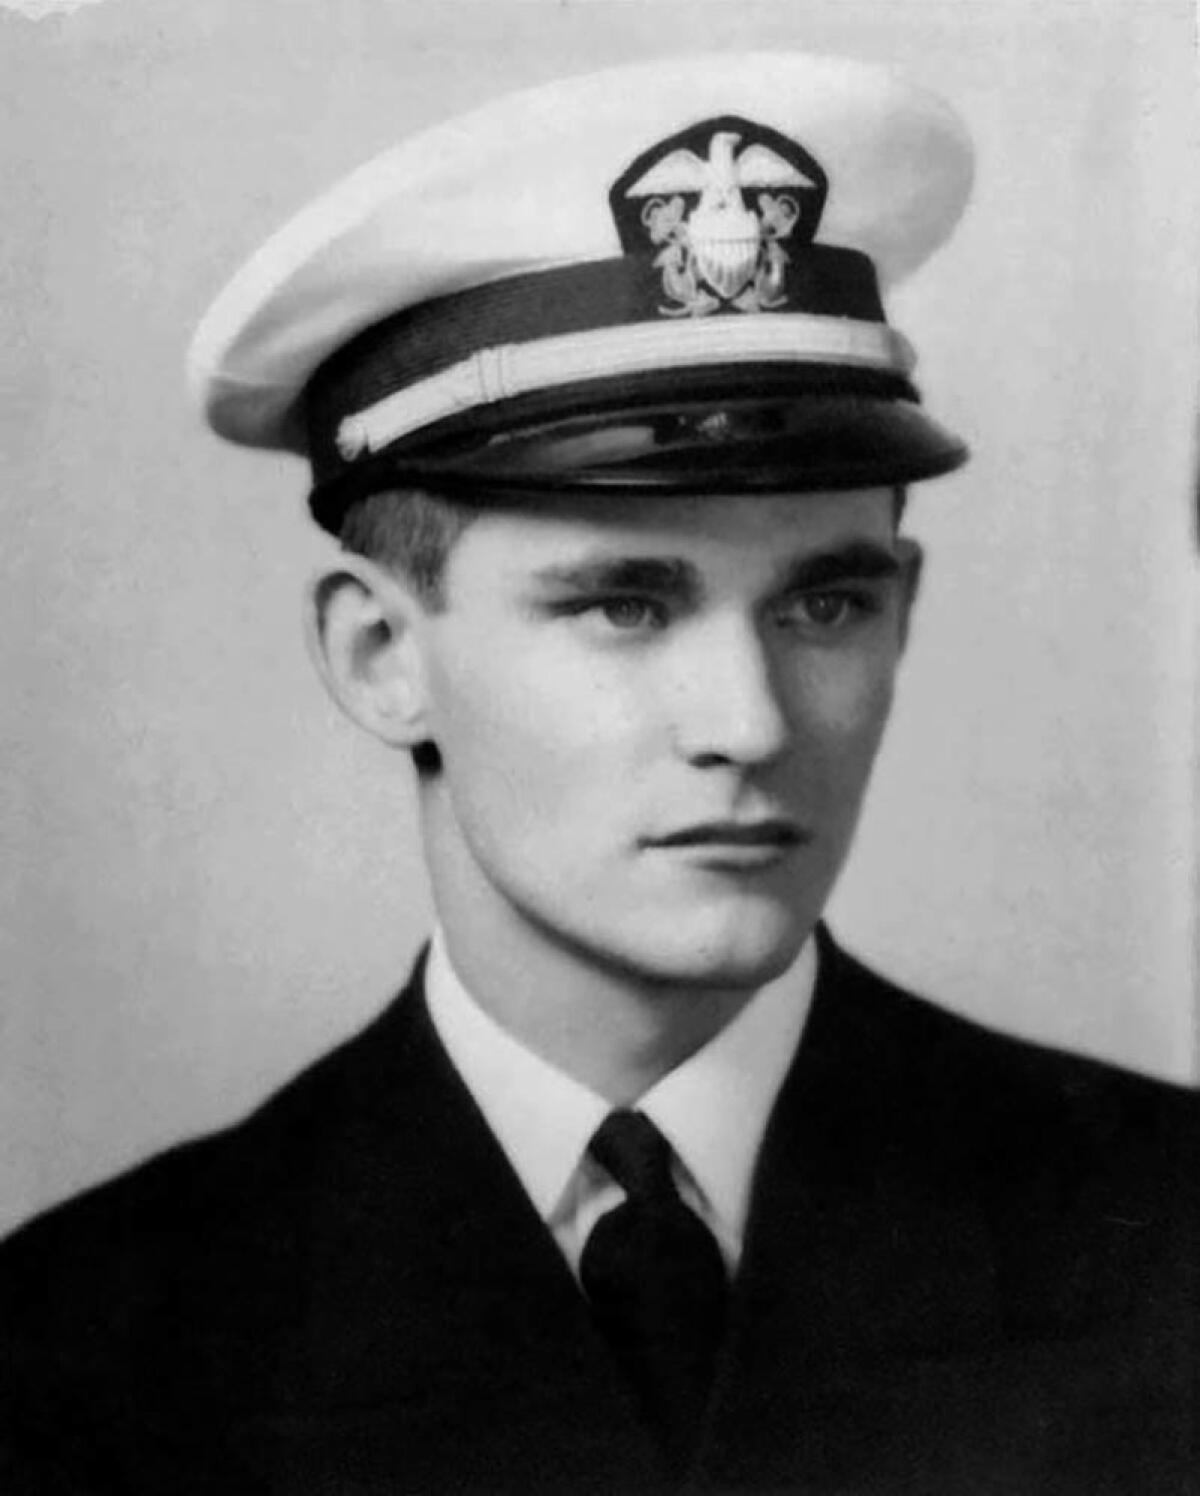 Ensign John C. England, who lost his life in the Japanese attack on Pearl Harbor on Dec. 7, 1941.